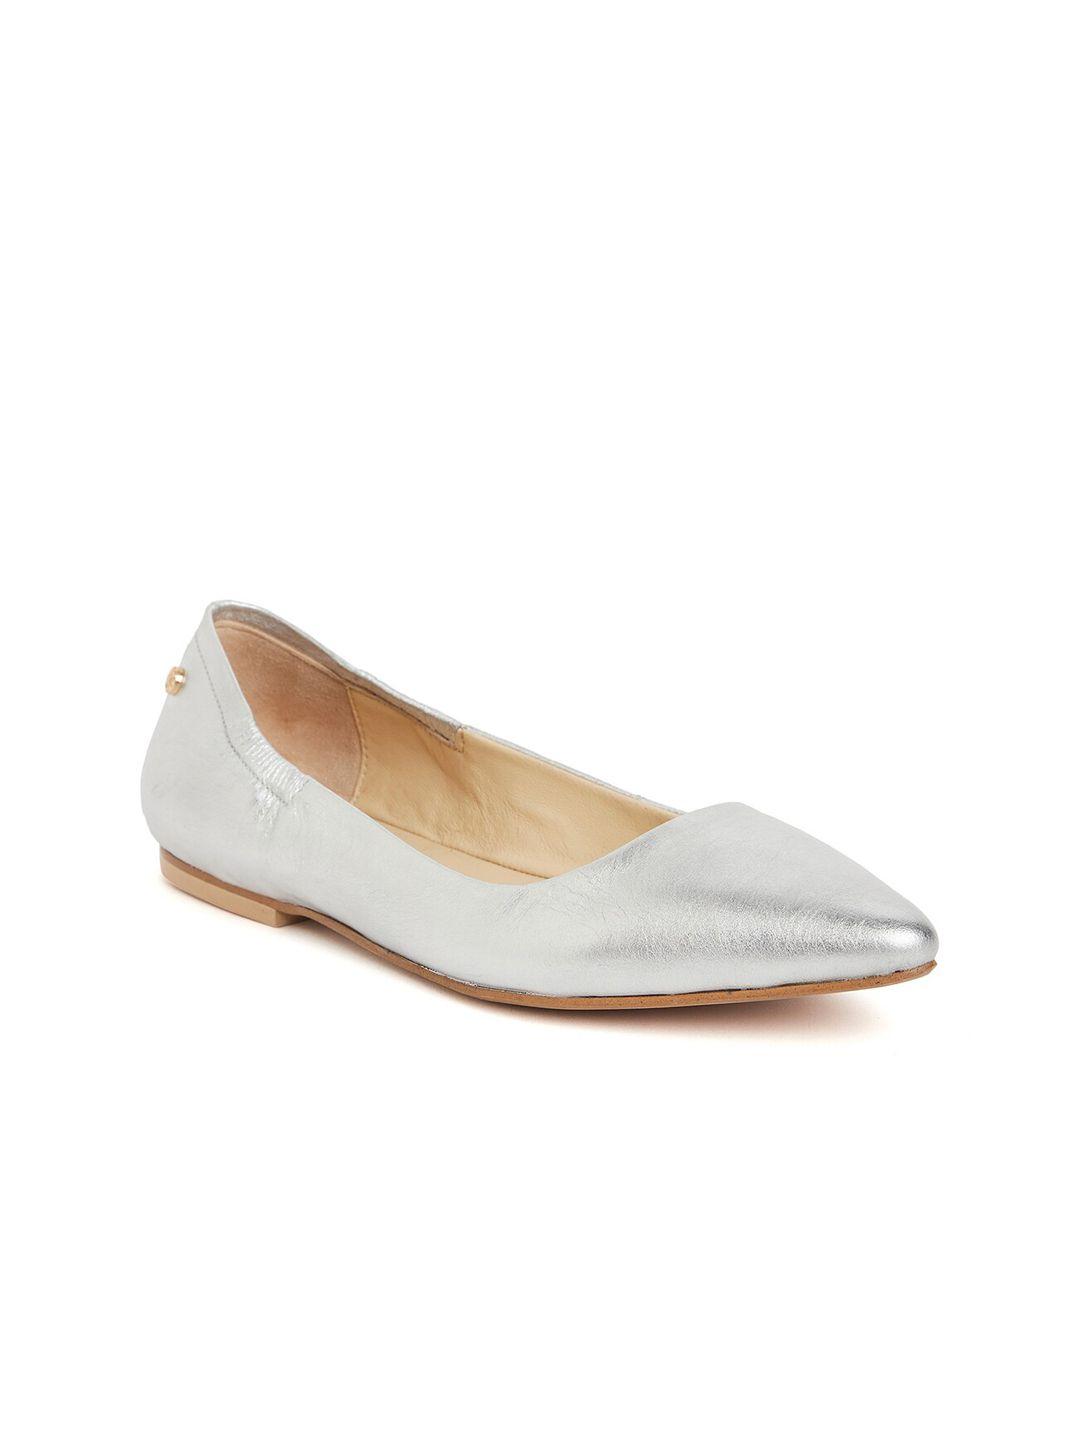 peach flores pointed toe leather ballerinas